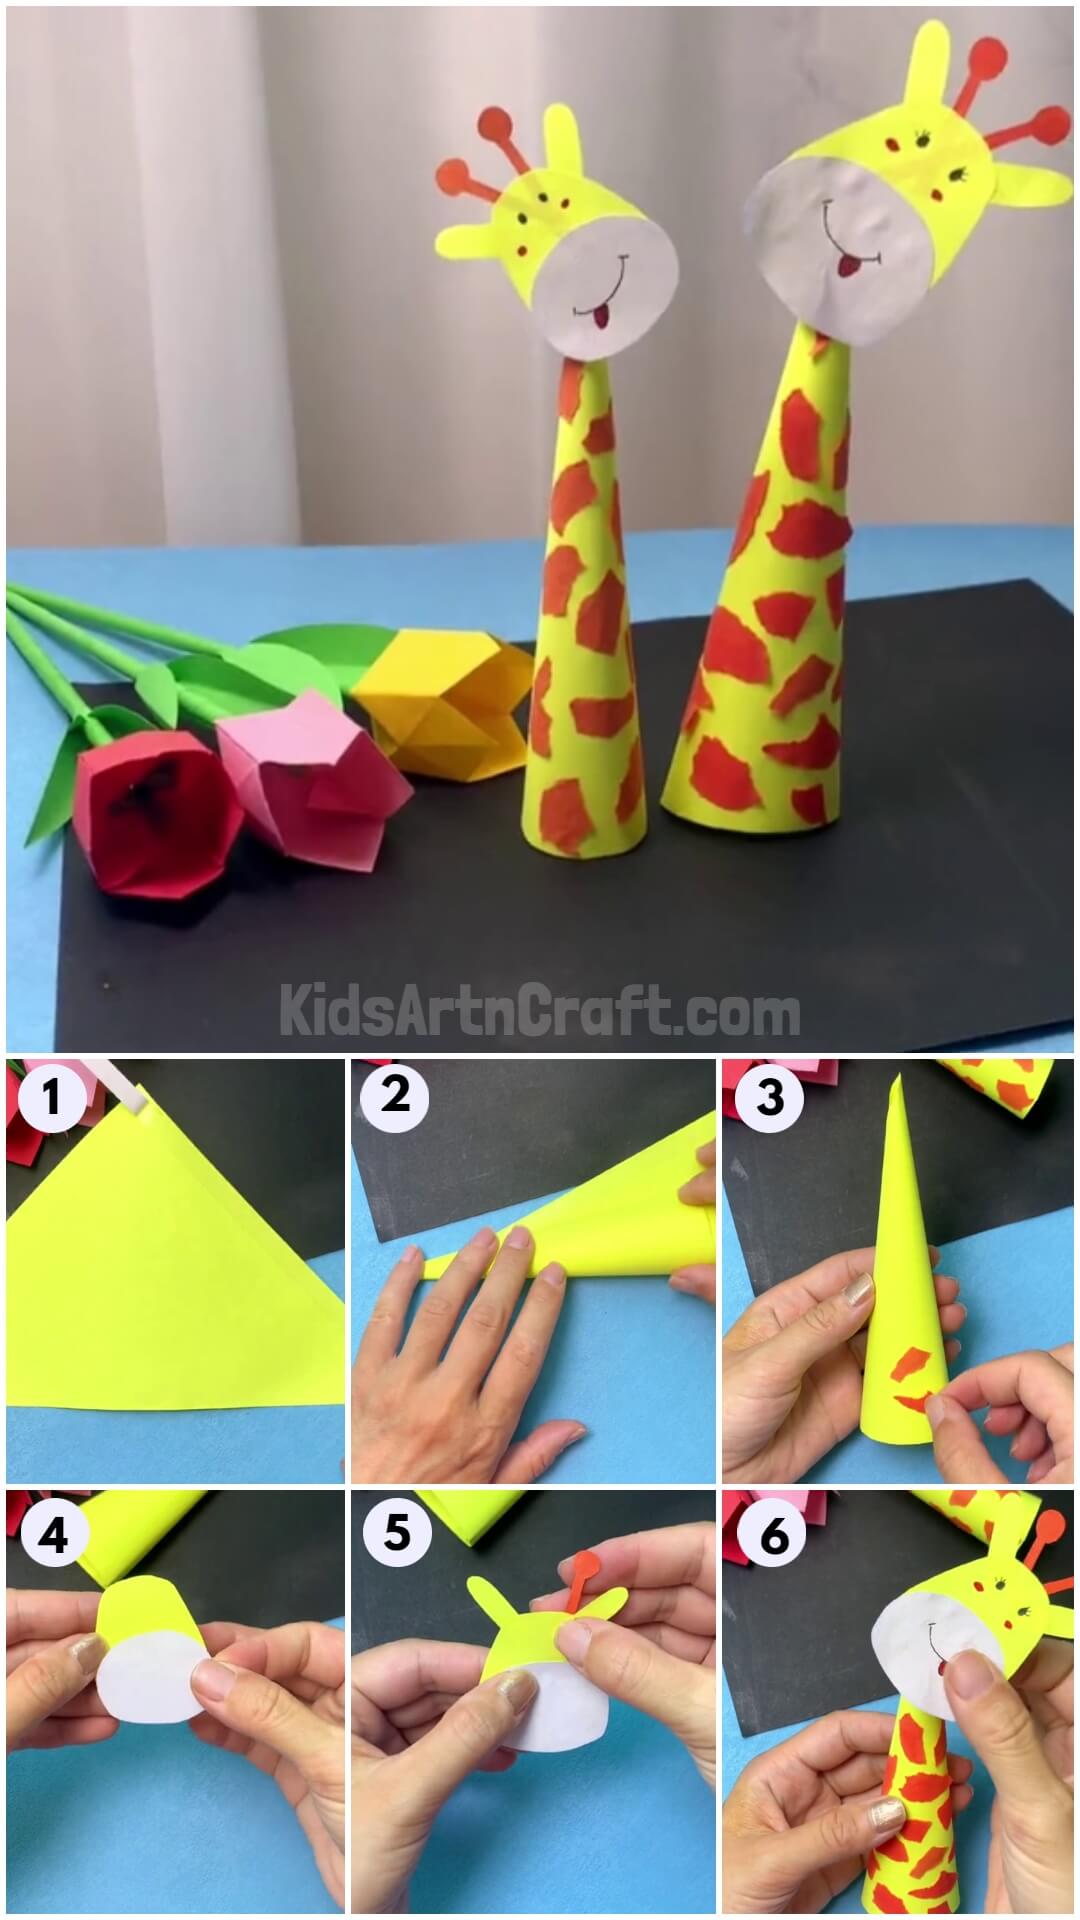 Cone-Shaped Giraffe Paper Decoration Craft For Kids